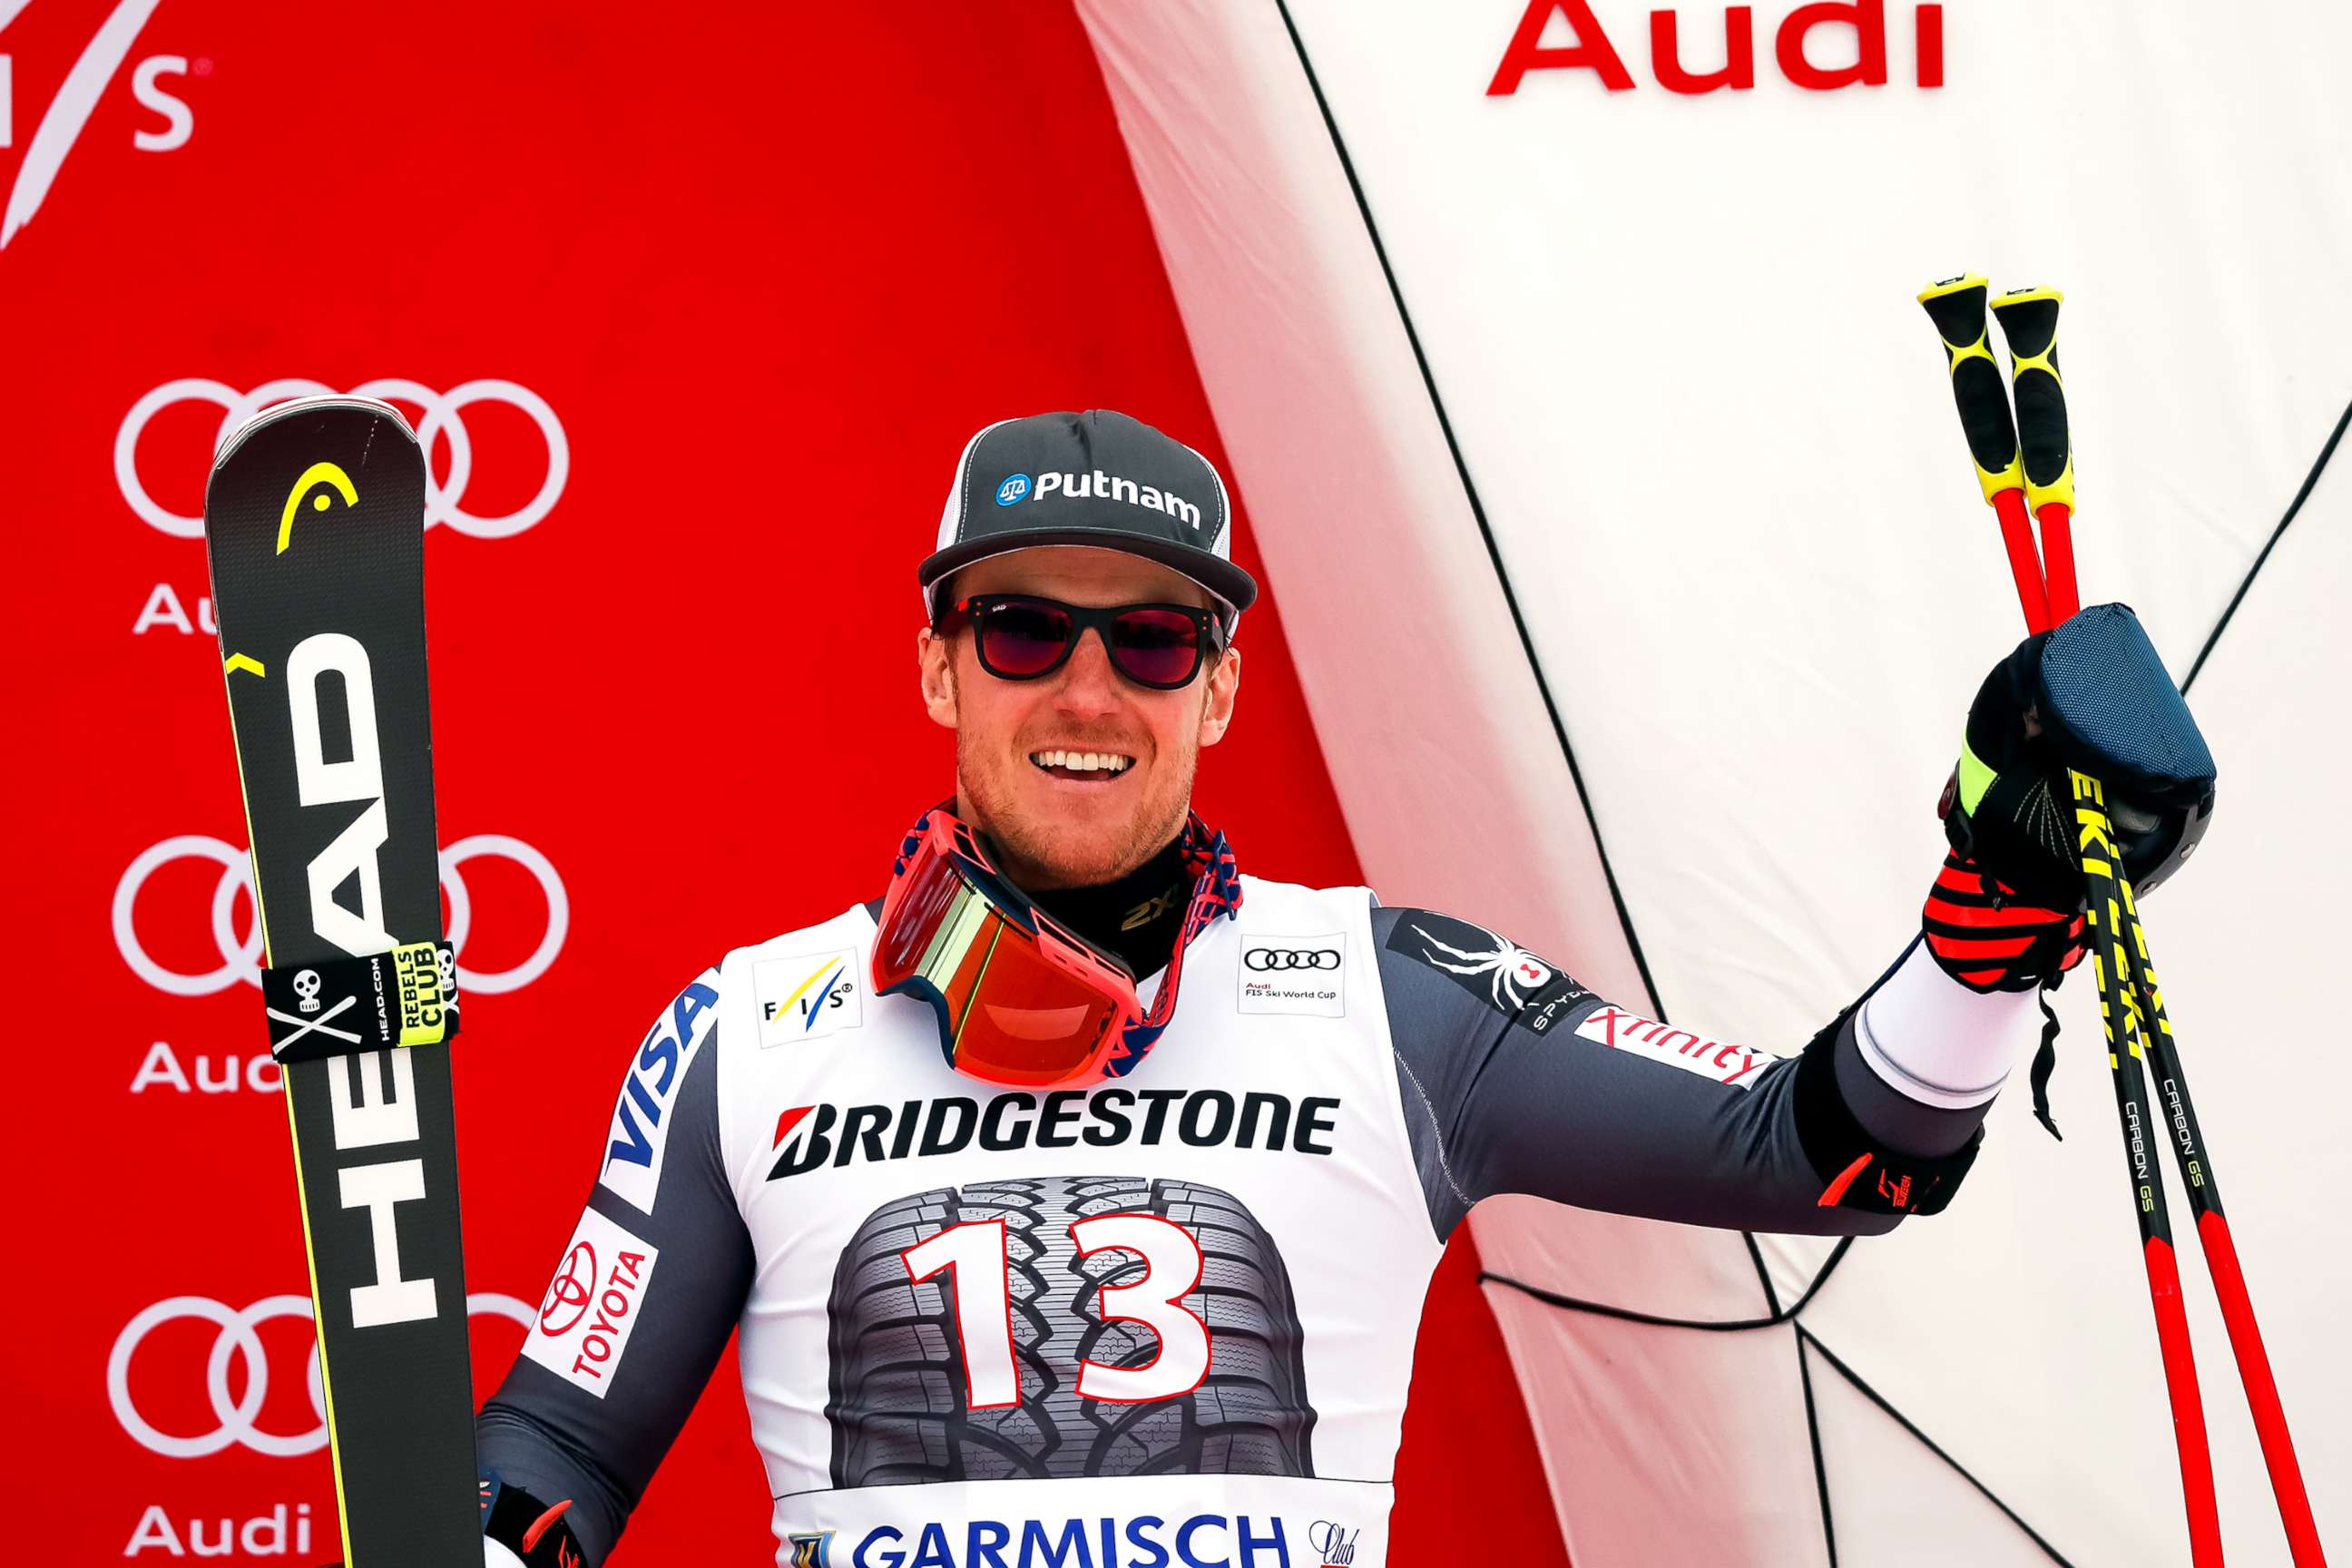 PHOTO: Ted Ligety takes 3rd place during the Audi FIS Alpine Ski World Cup Men's Giant Slalom on Jan. 28, 2018, in Garmisch-Partenkirchen, Germany. 